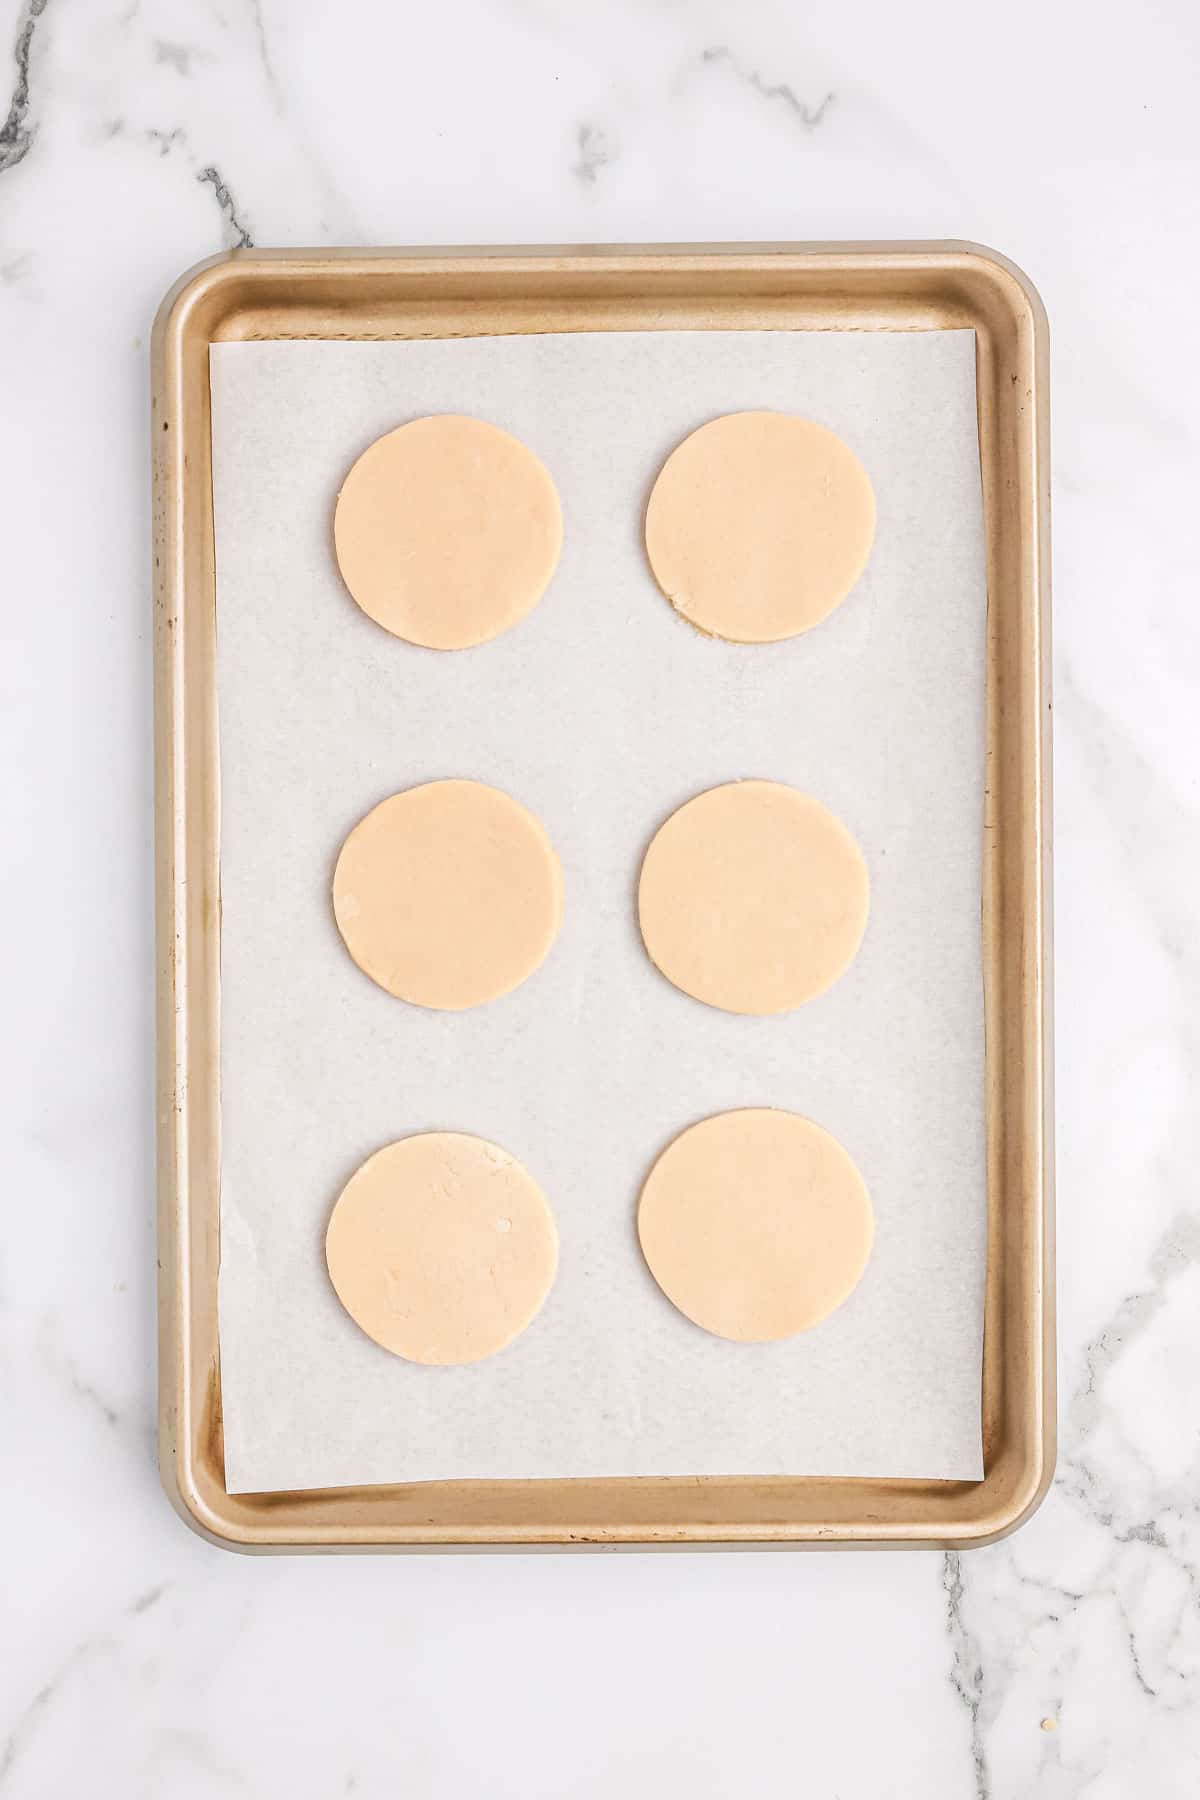 Rolled sugar cookies cut into circles on a baking sheet.